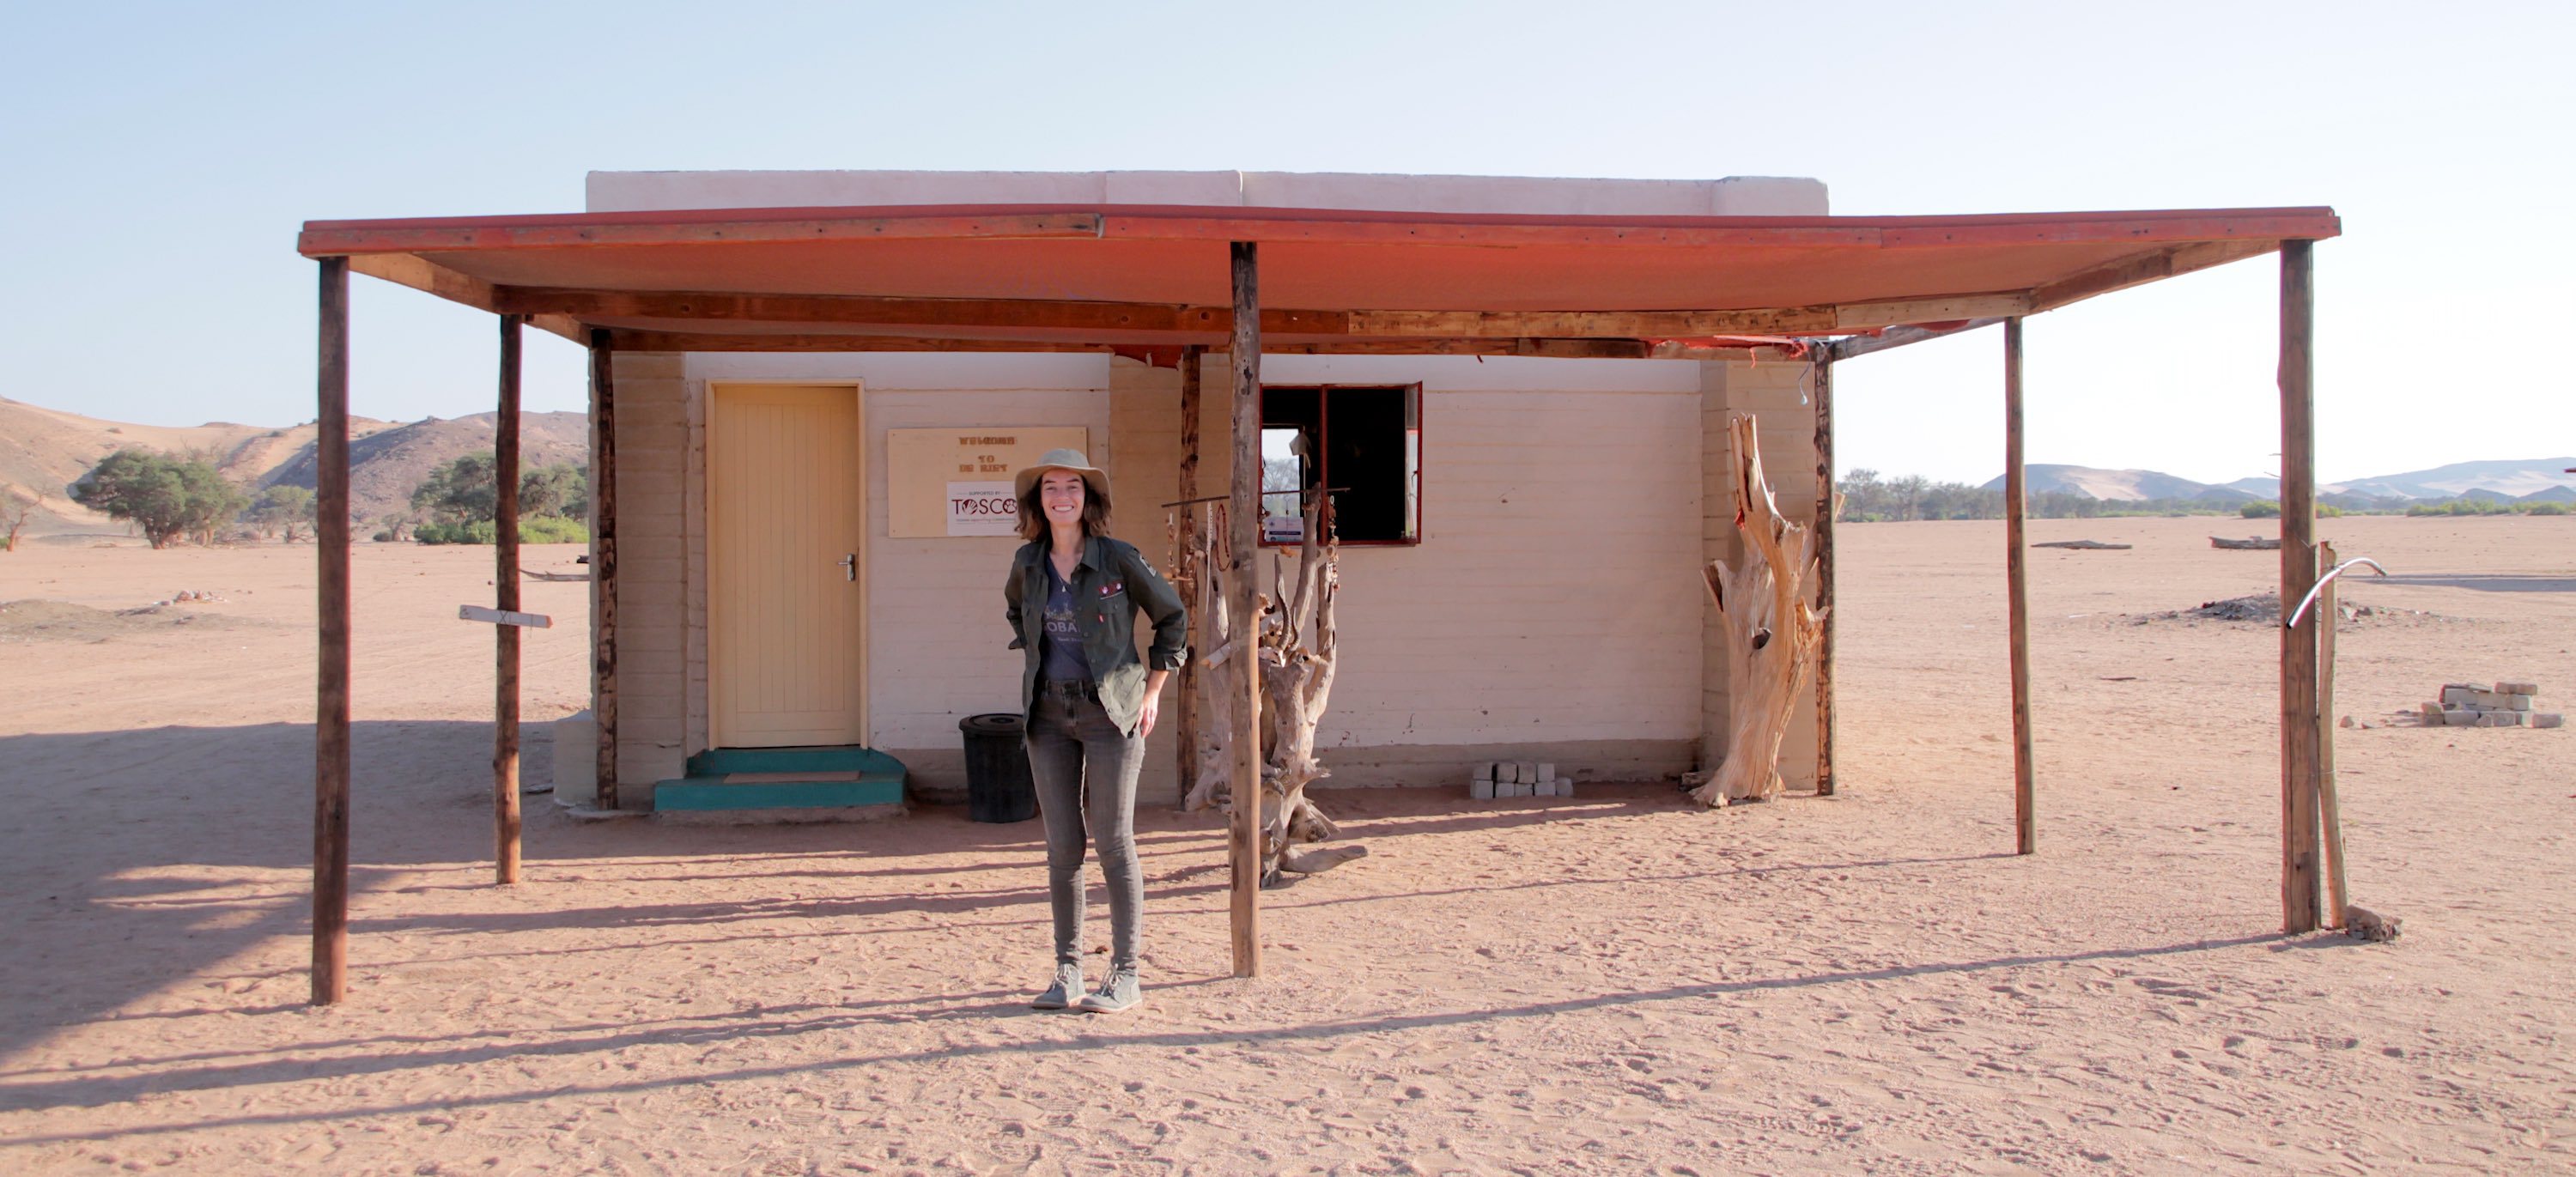 A woman stands in front of a simple office building in the midst of the desert.